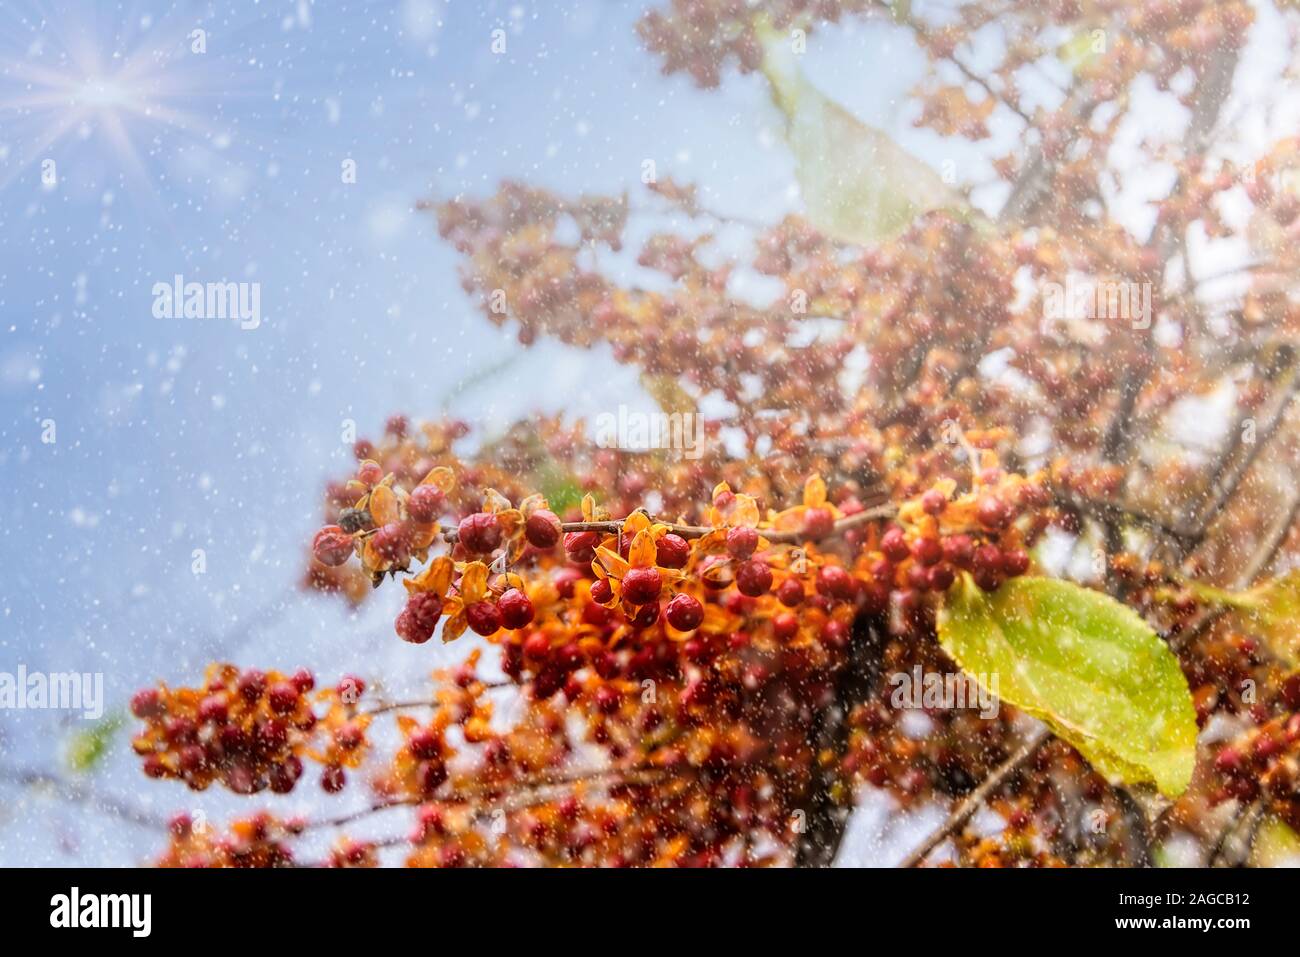 Red Berries on a tree branch with light snow falling and small sun flare Stock Photo